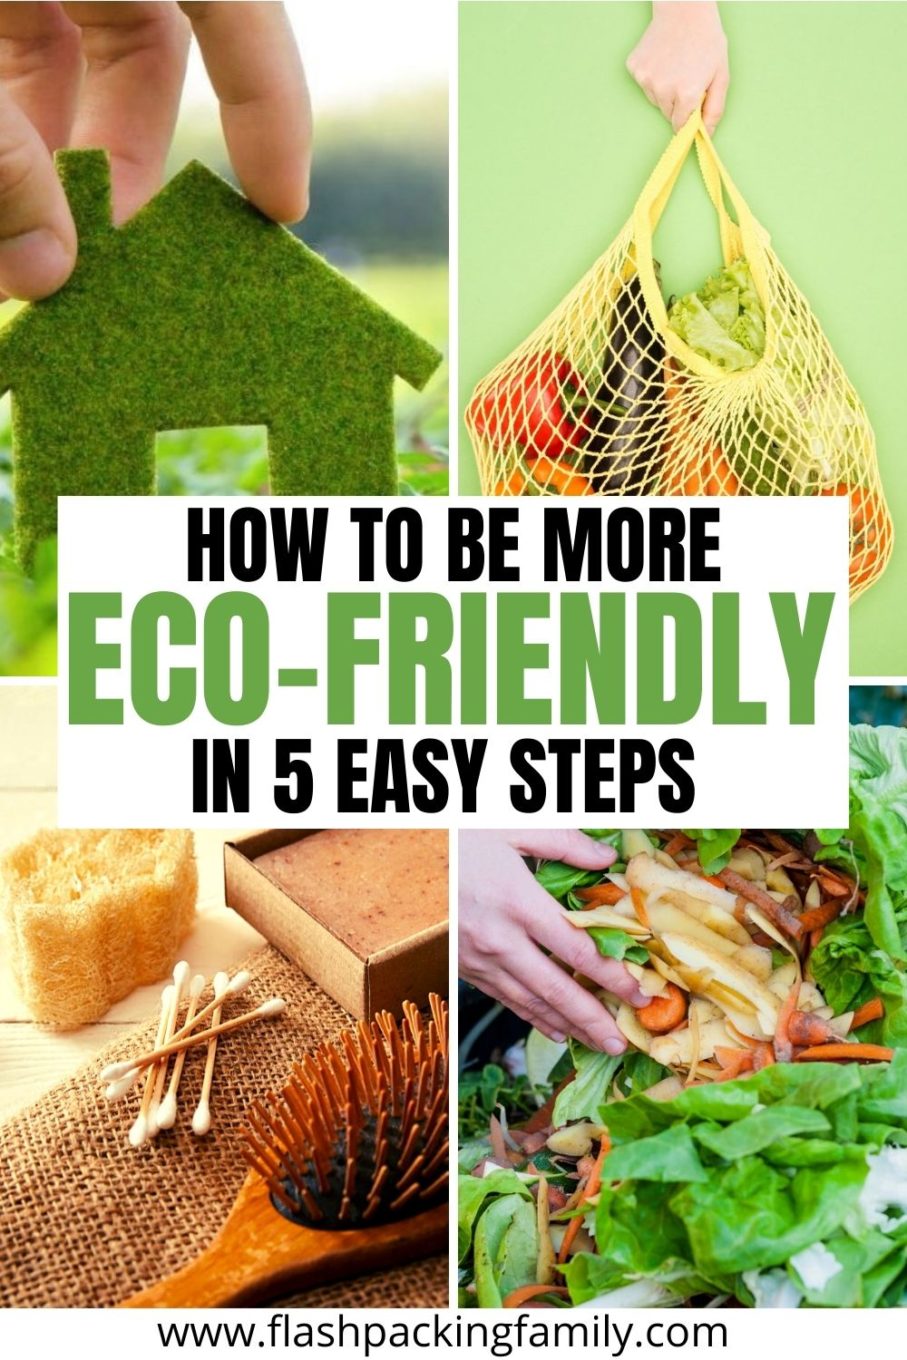 How to be more eco friendly in 5 easy steps